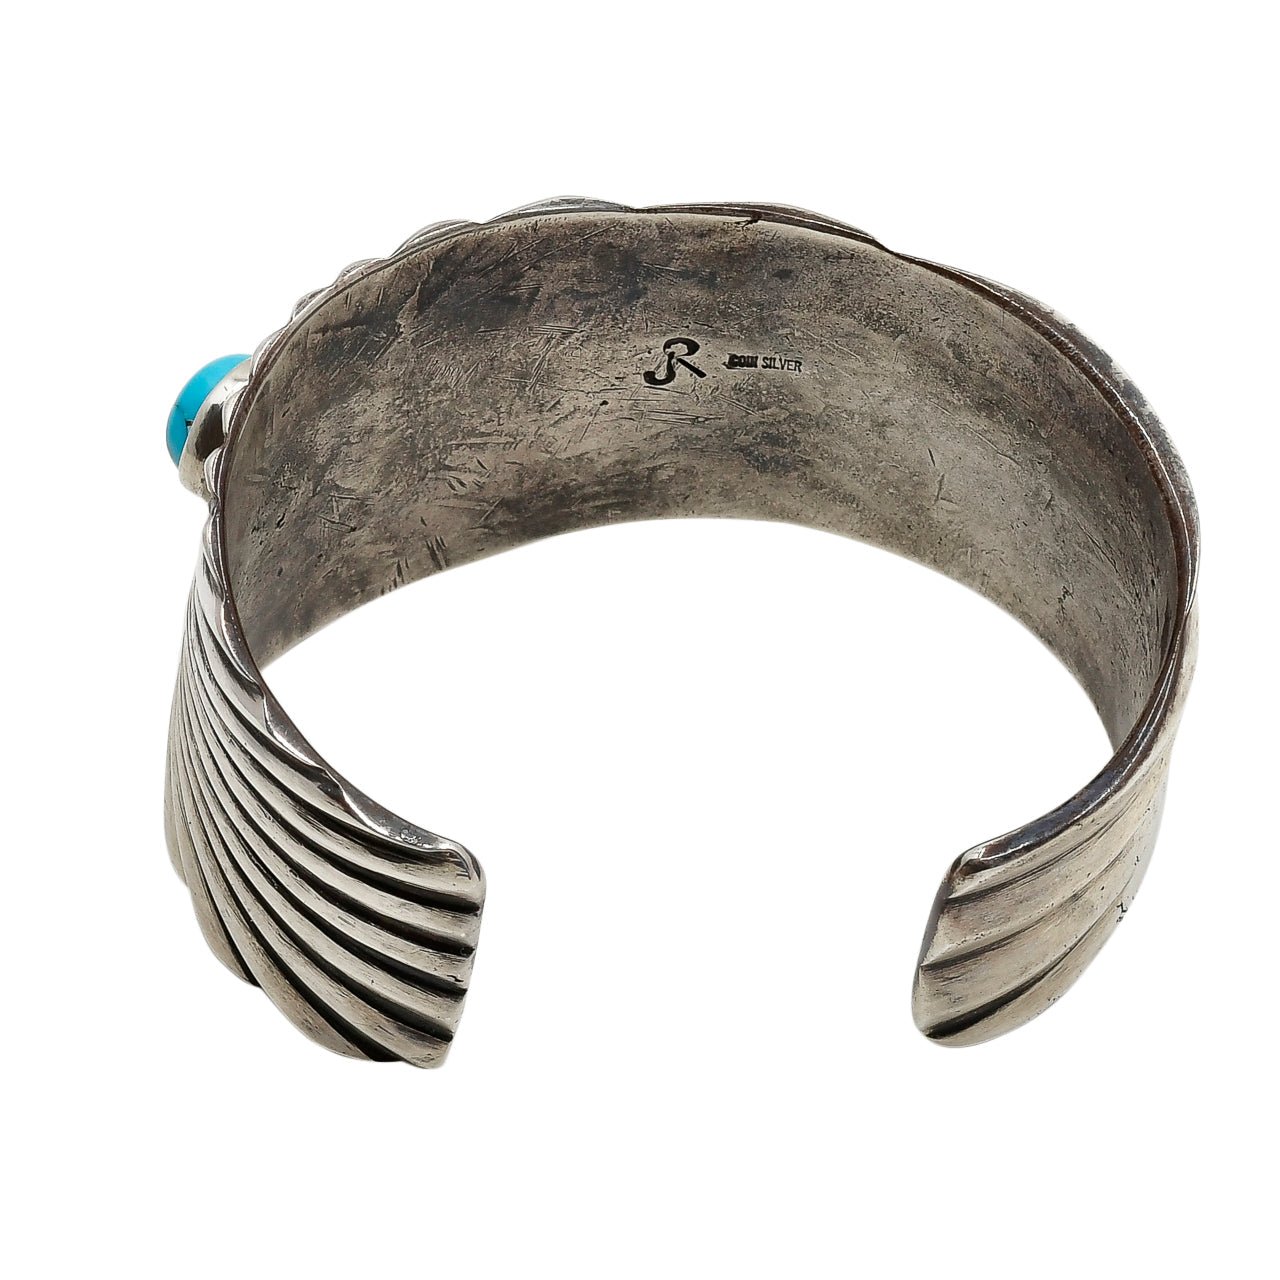 Wide Jesse Robbins Cuff of Ingot Silver and Turquoise - Turquoise & Tufa